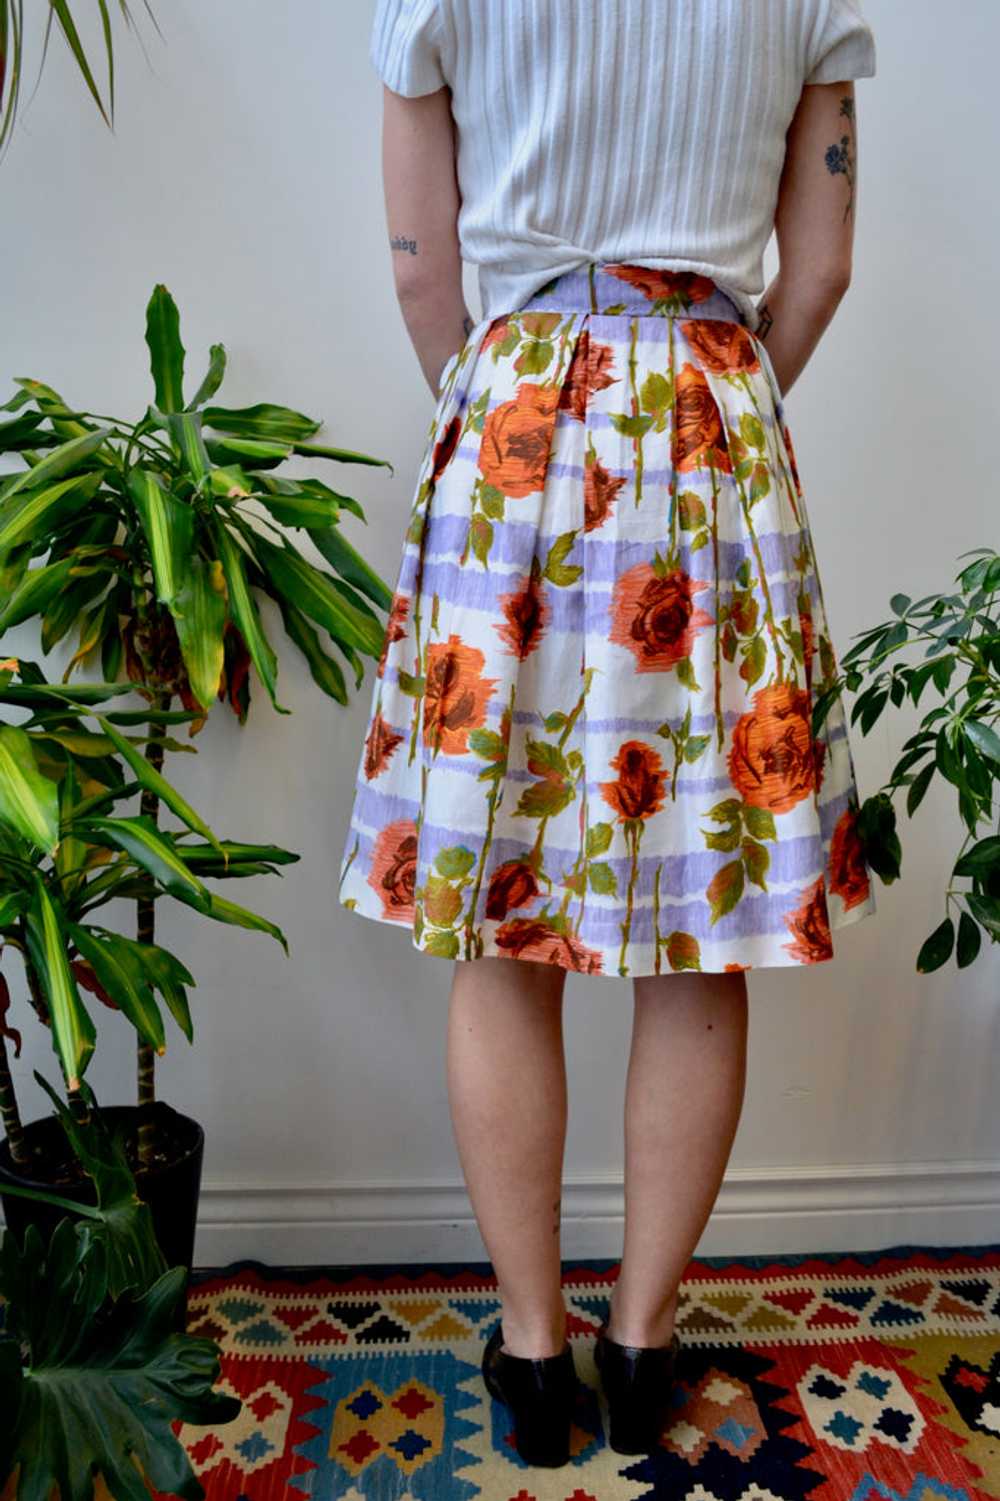 Sixties Cotton Floral Skirt - image 2